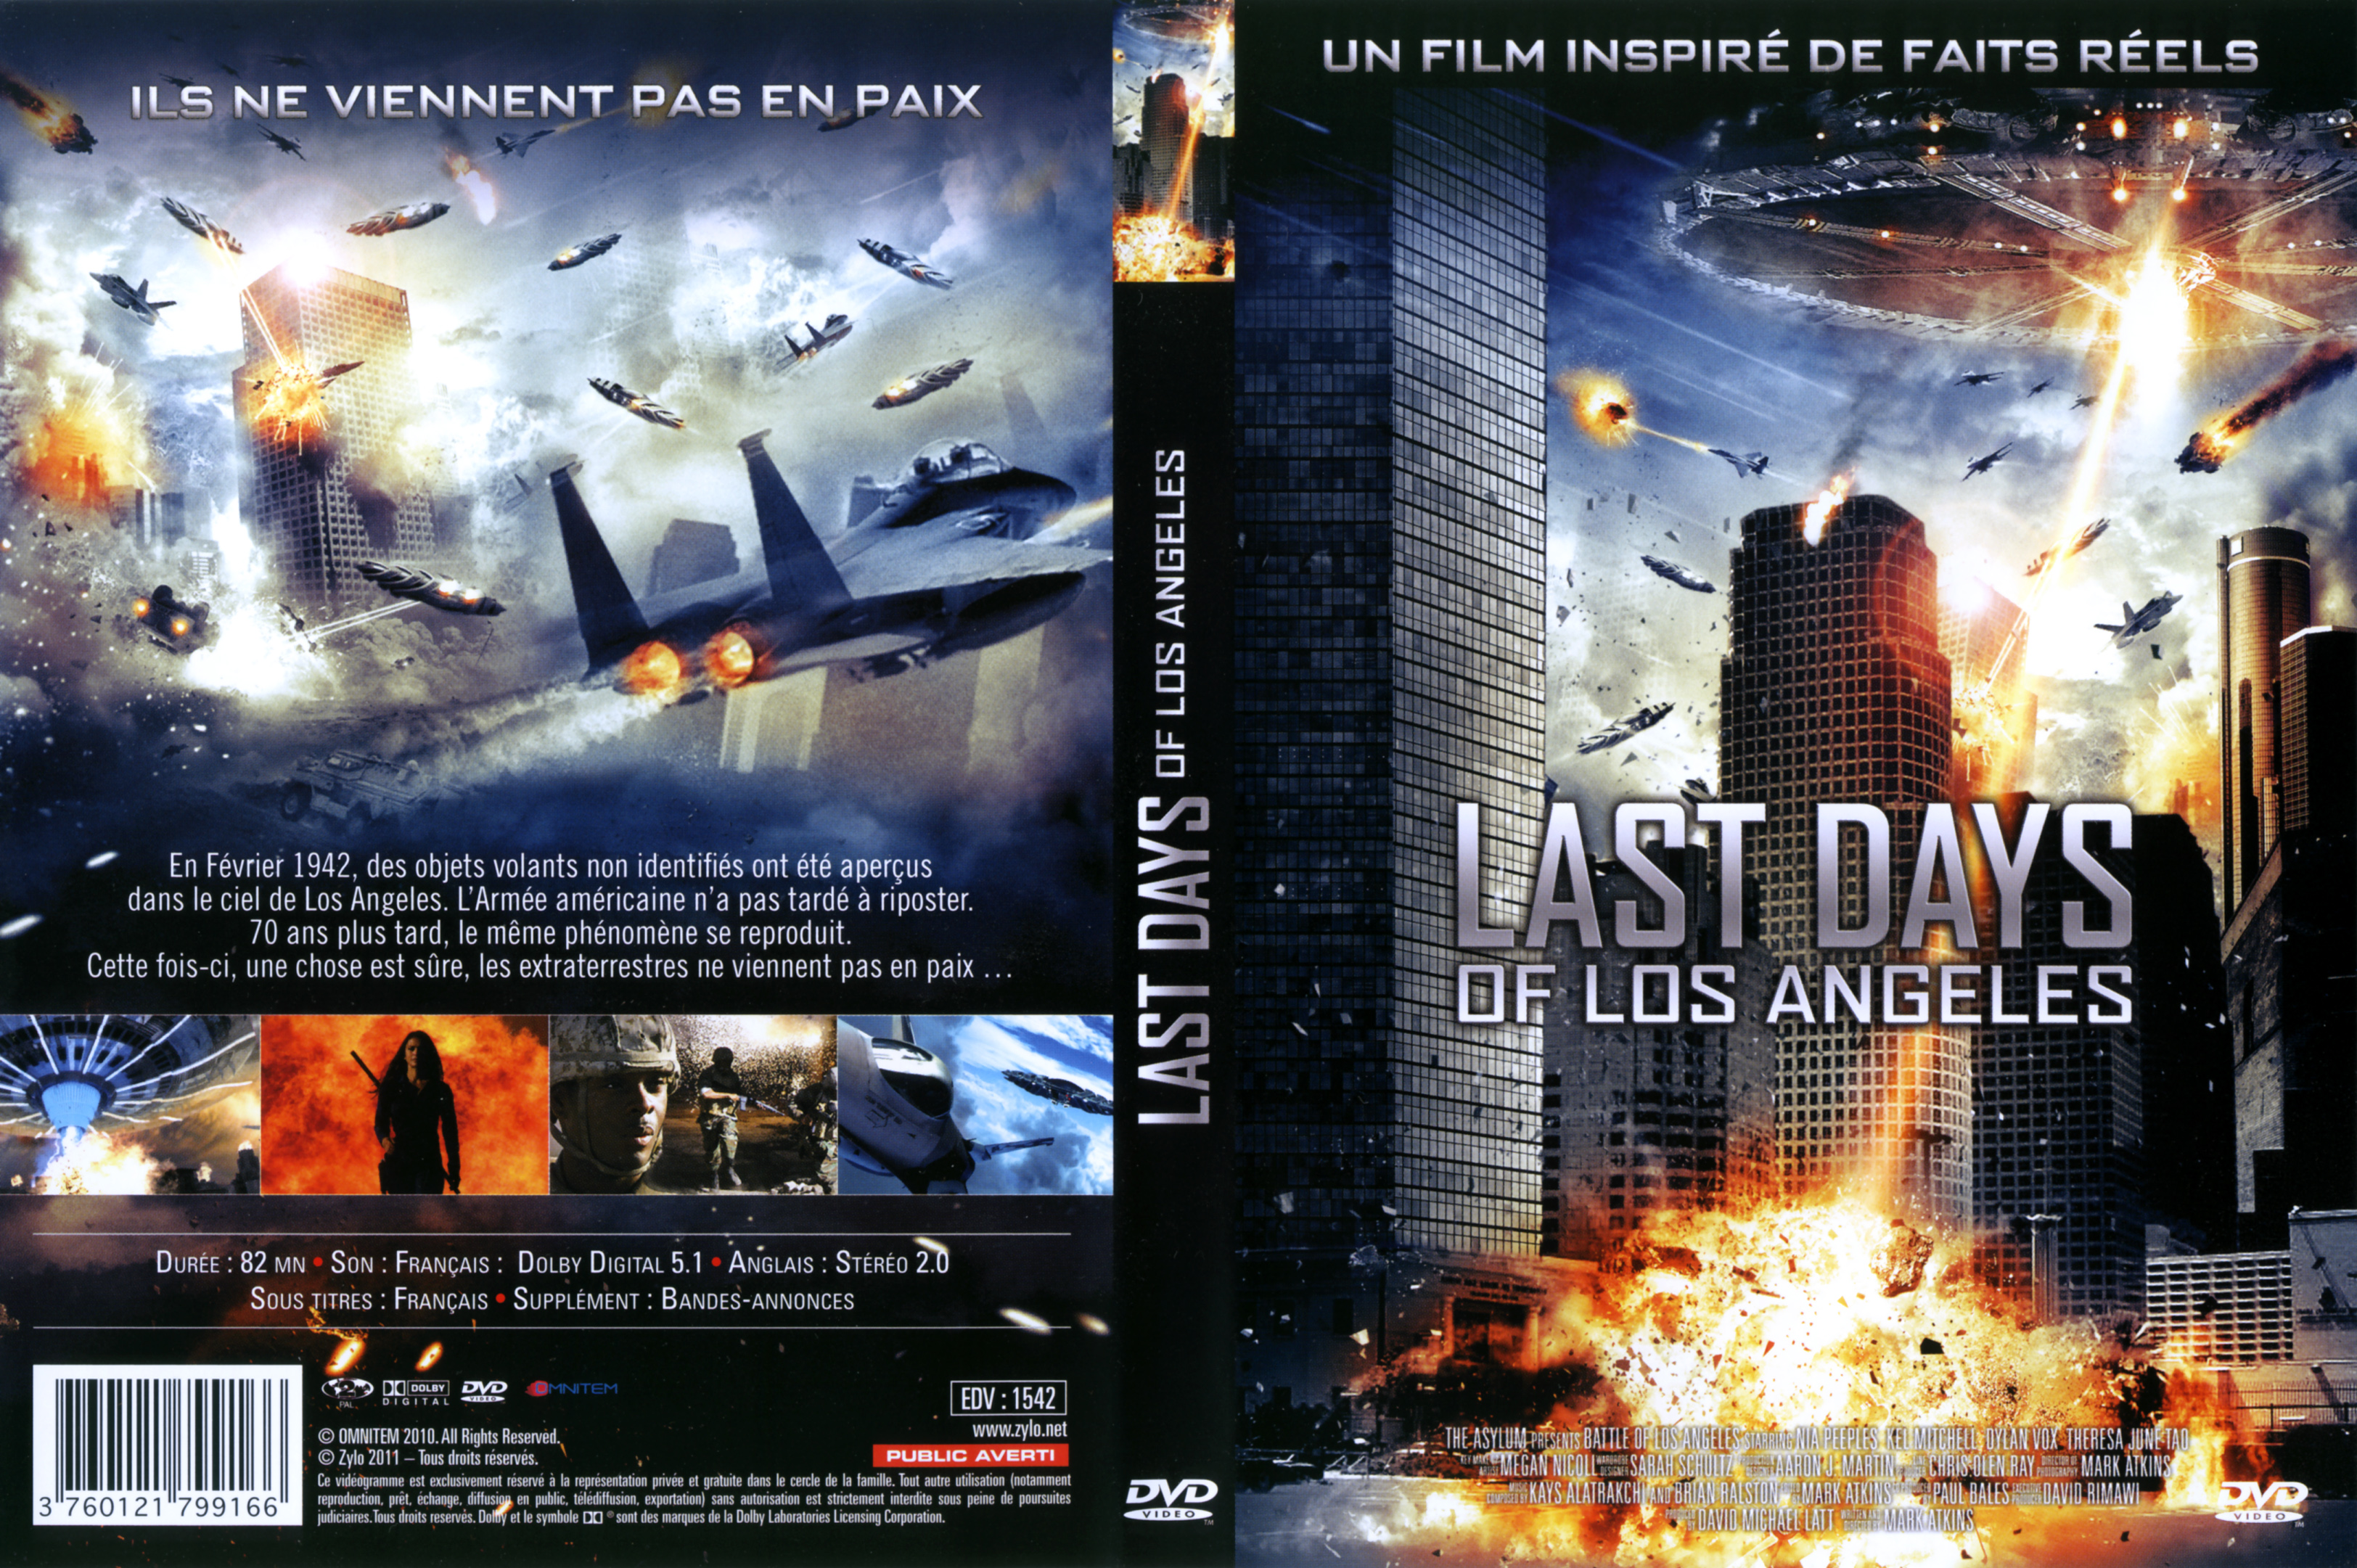 Jaquette DVD Last days of Los Angeles